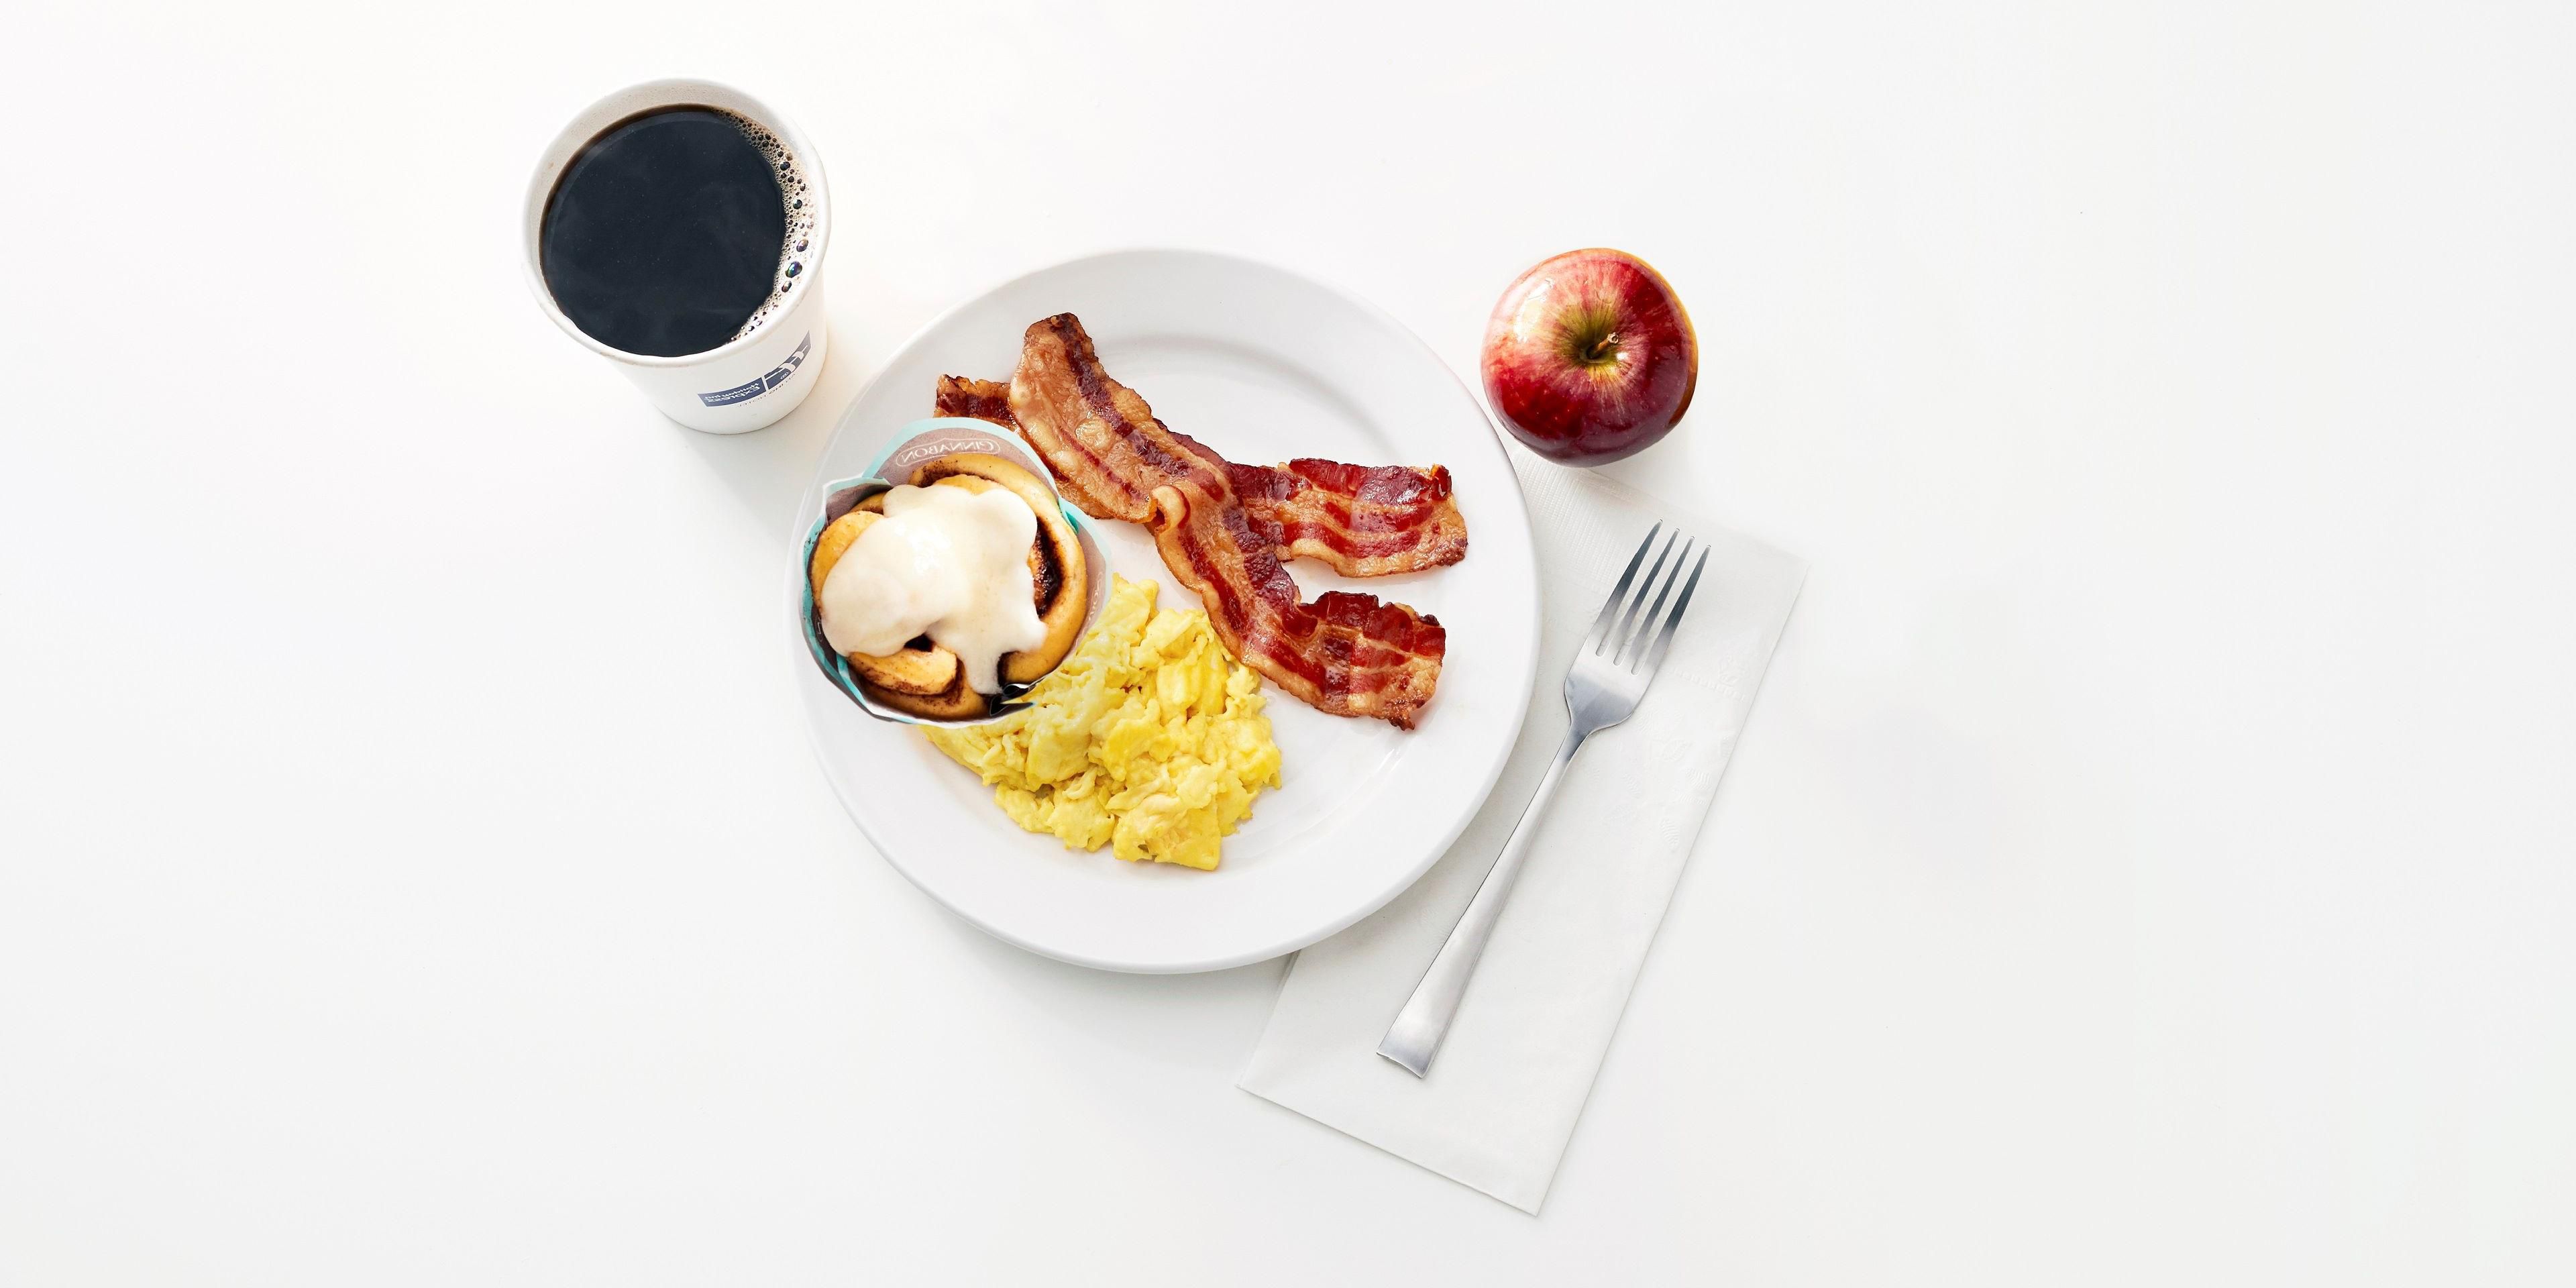 Kick start your day with our Express Start Breakfast, with grab ‘n’ go options and favorites such as eggs and bacon, hot pancakes, our signature cinnamon rolls and fresh coffee. Offered from 6:00 am - 9:30 am.